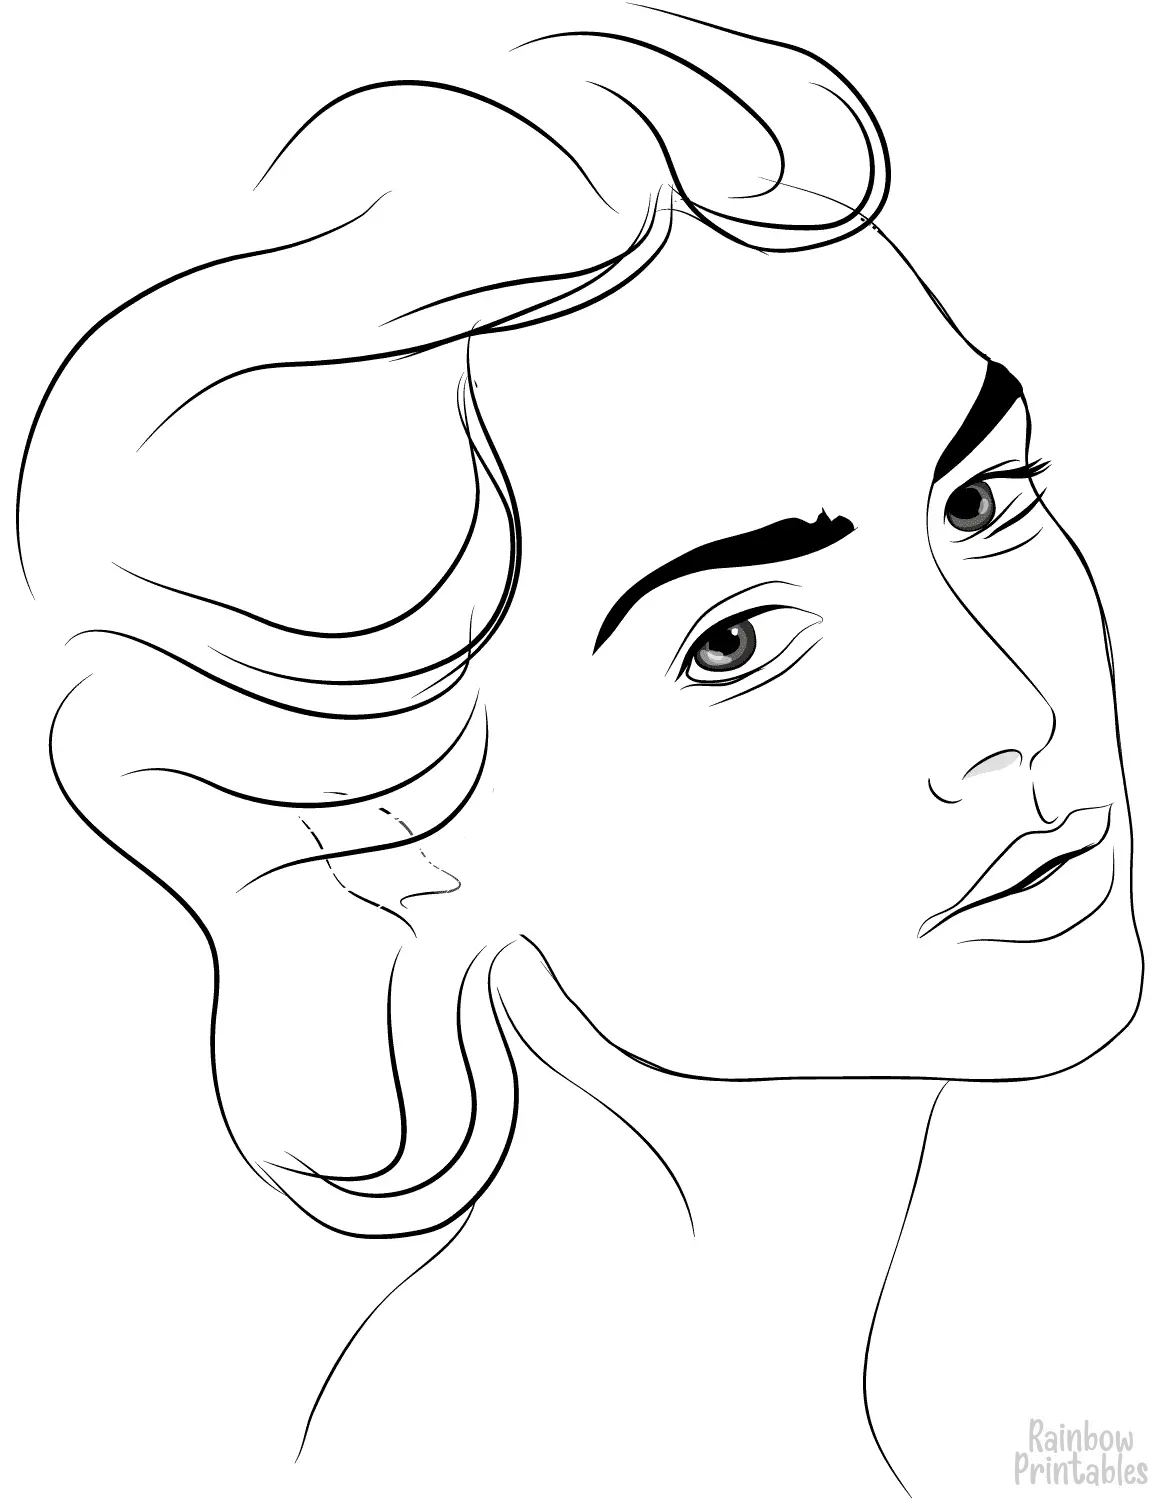 BEAUTIFUL WOMAN High Fashion Portrait Girl Free Clipart Coloring Pages for Kids Adults Art Activities Line Art